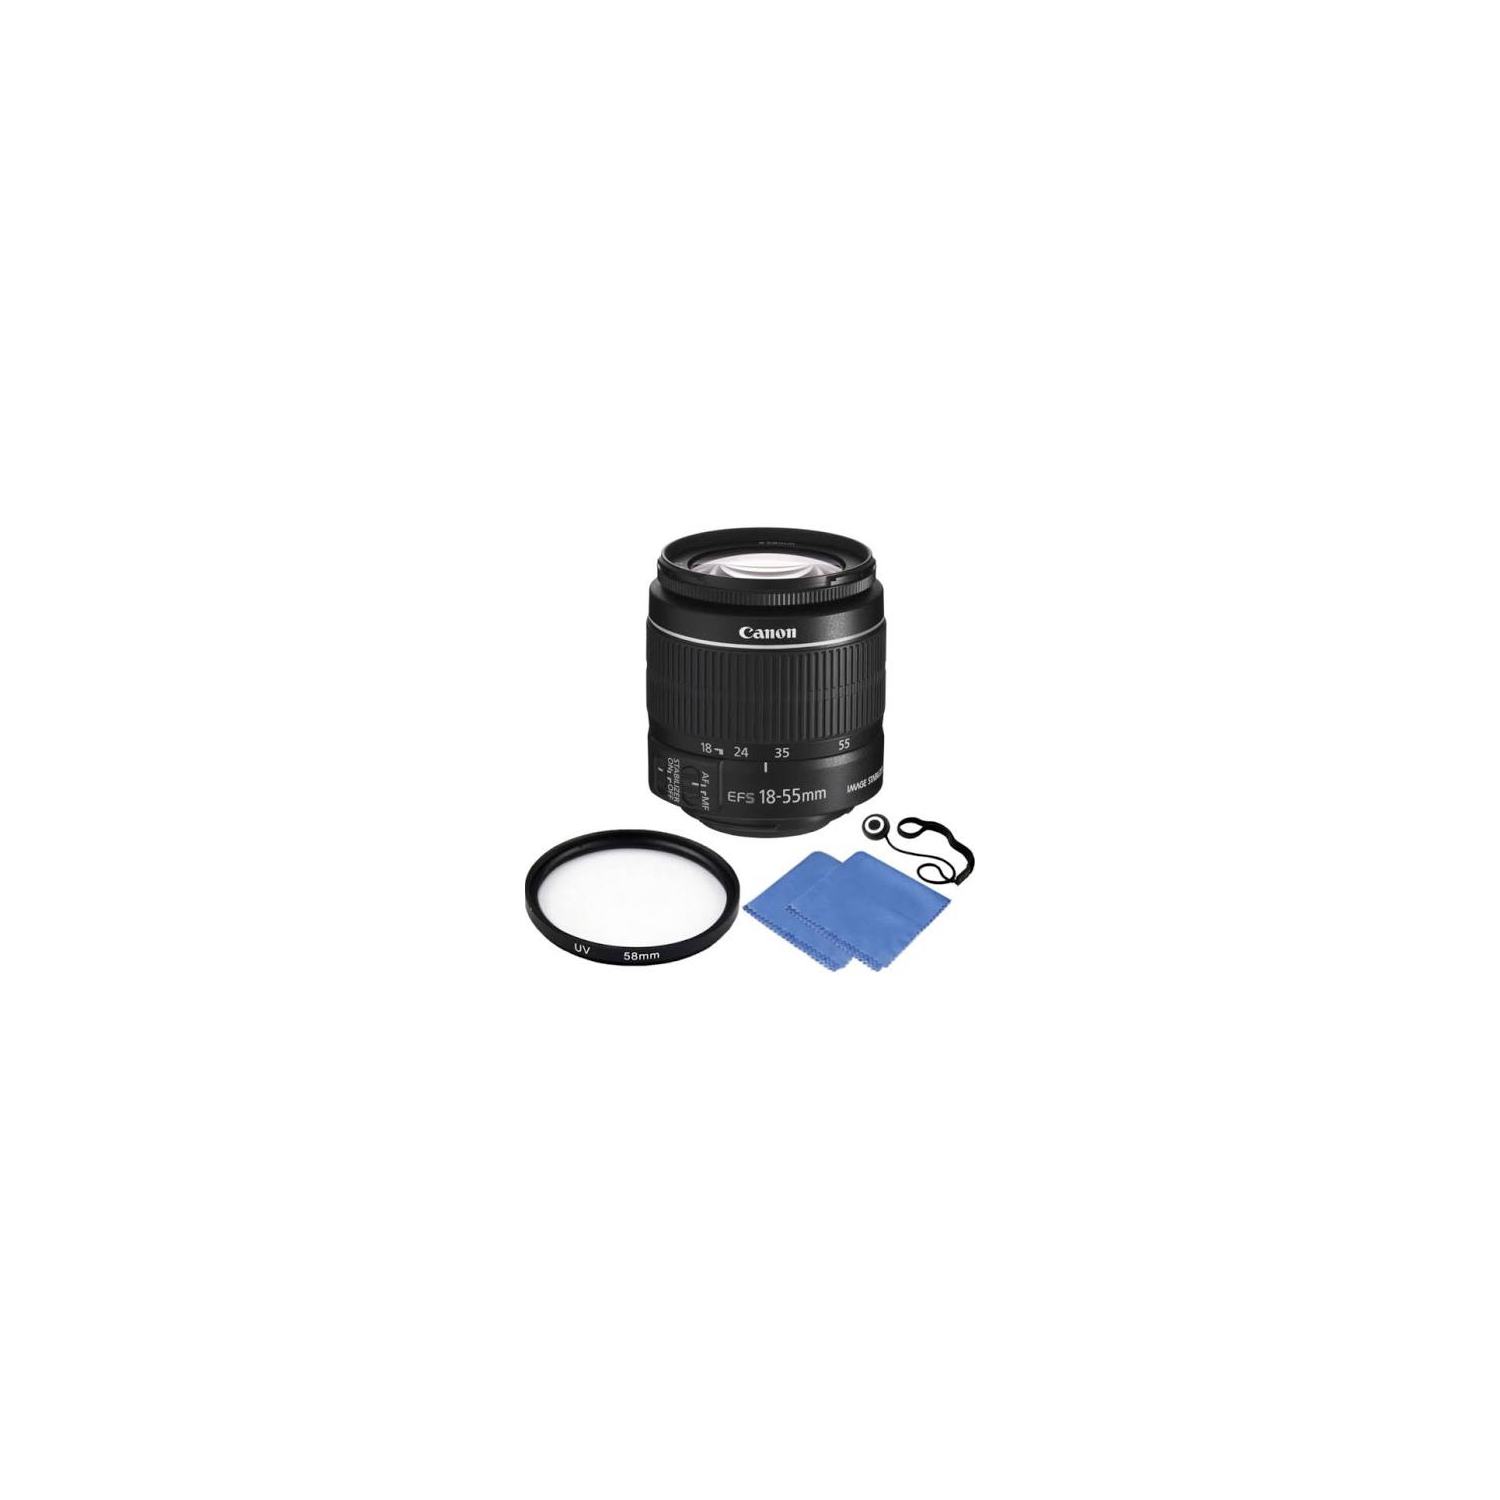 Canon EF-S 18-55mm f/3.5-5.6 Is II Lens + 58mm UV Accessory Kit for Canon T5, T6 - US Version w/ Seller Warranty